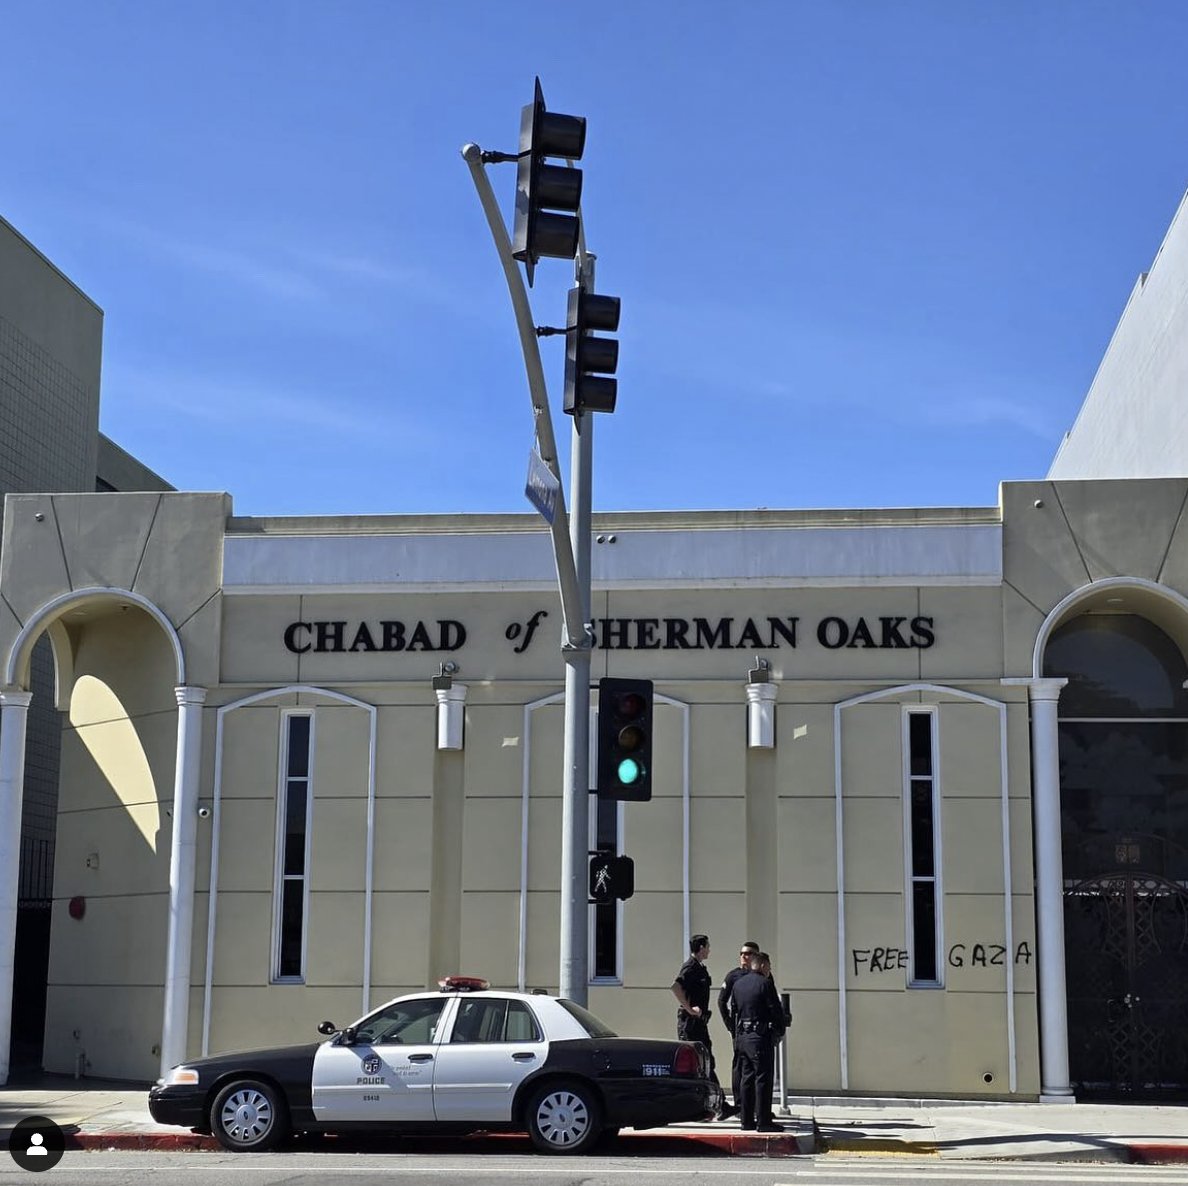 Yet another hate crime in Los Angeles, this time at a synagogue in Sherman Oaks. Antizionism is antisemitism. Pro-Hamas extremists are terrorizing Jews in Los Angeles with impunity.